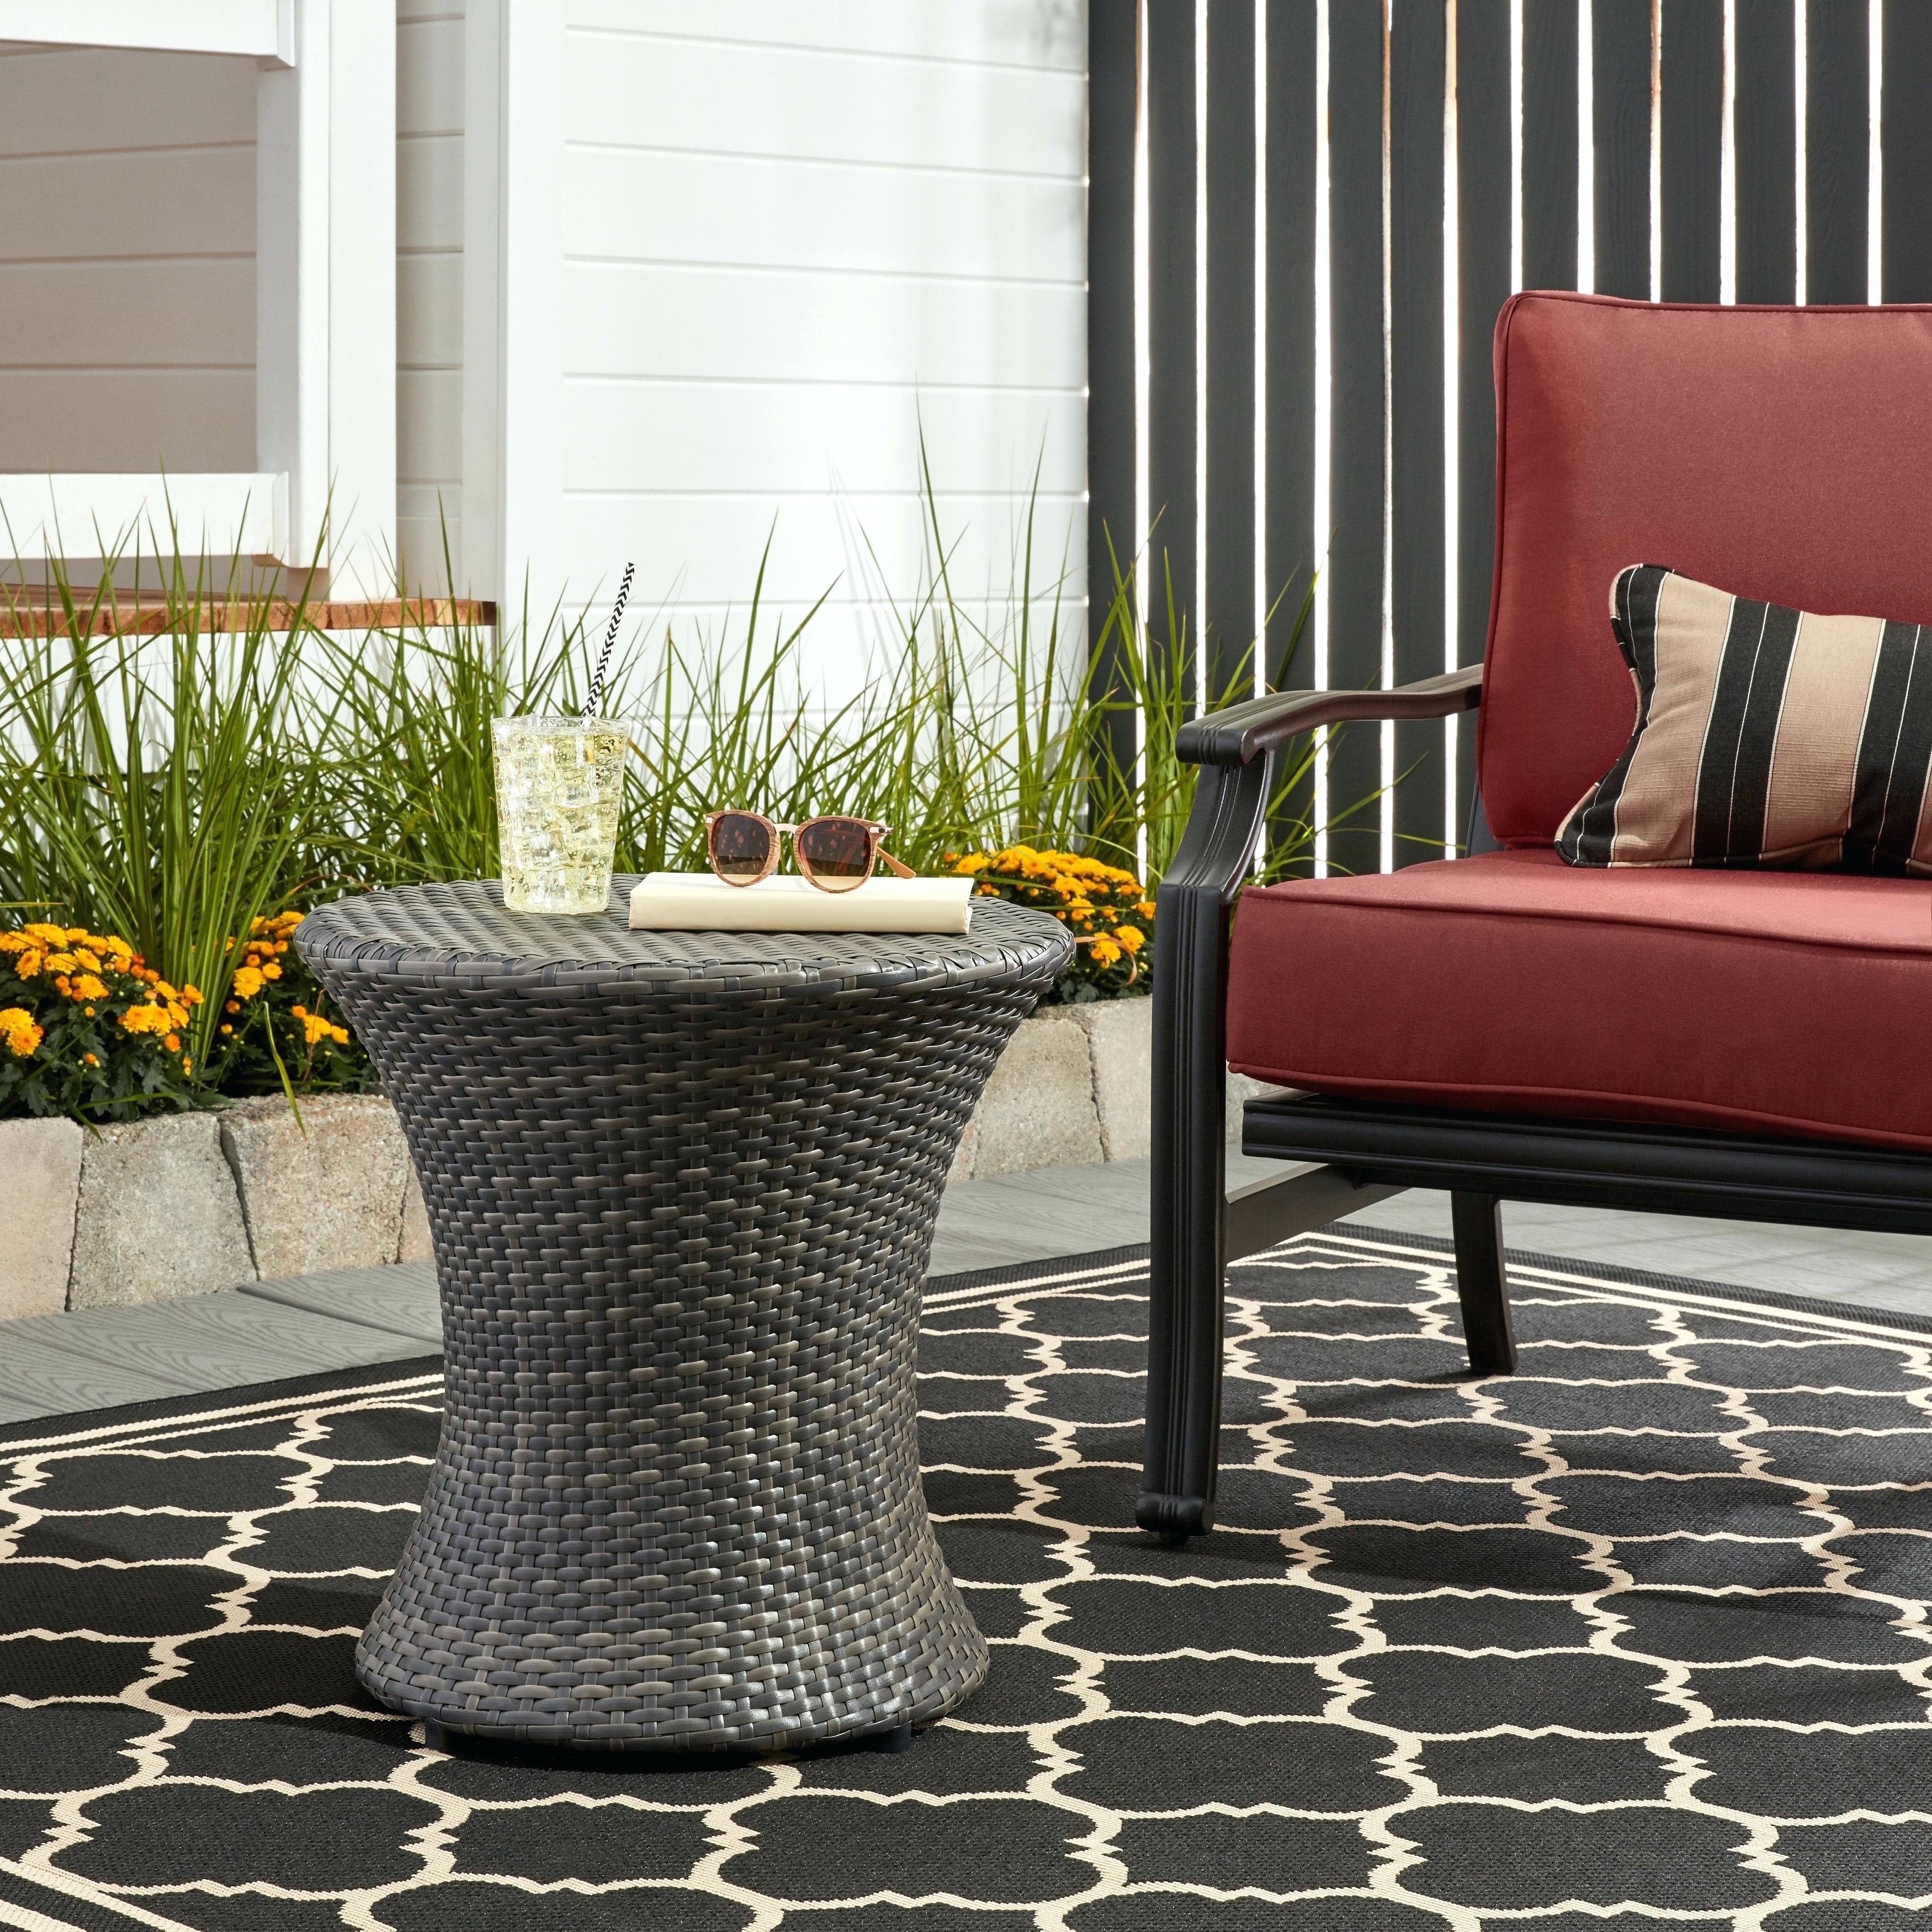 outdoor side table res diy plans mosaic tile wicker with umbrella white metal storage target accent kitchen sideboard gateleg counter hammered drum drop leaf and chairs dresser